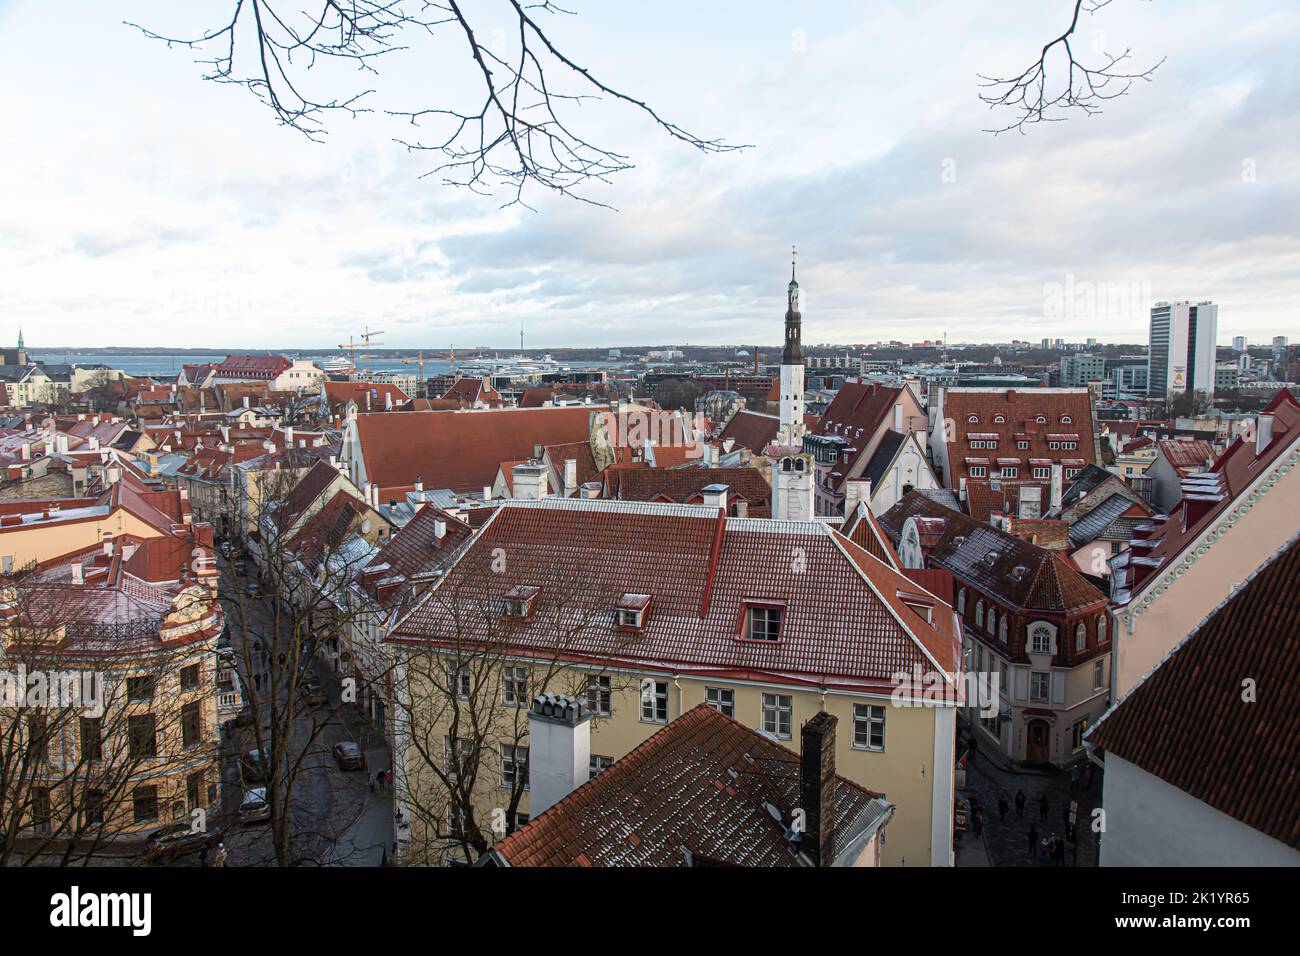 Tallinn, Estonia -  January 4, 2020: panoramic view of the city with medieval towers and walls, Stock Photo